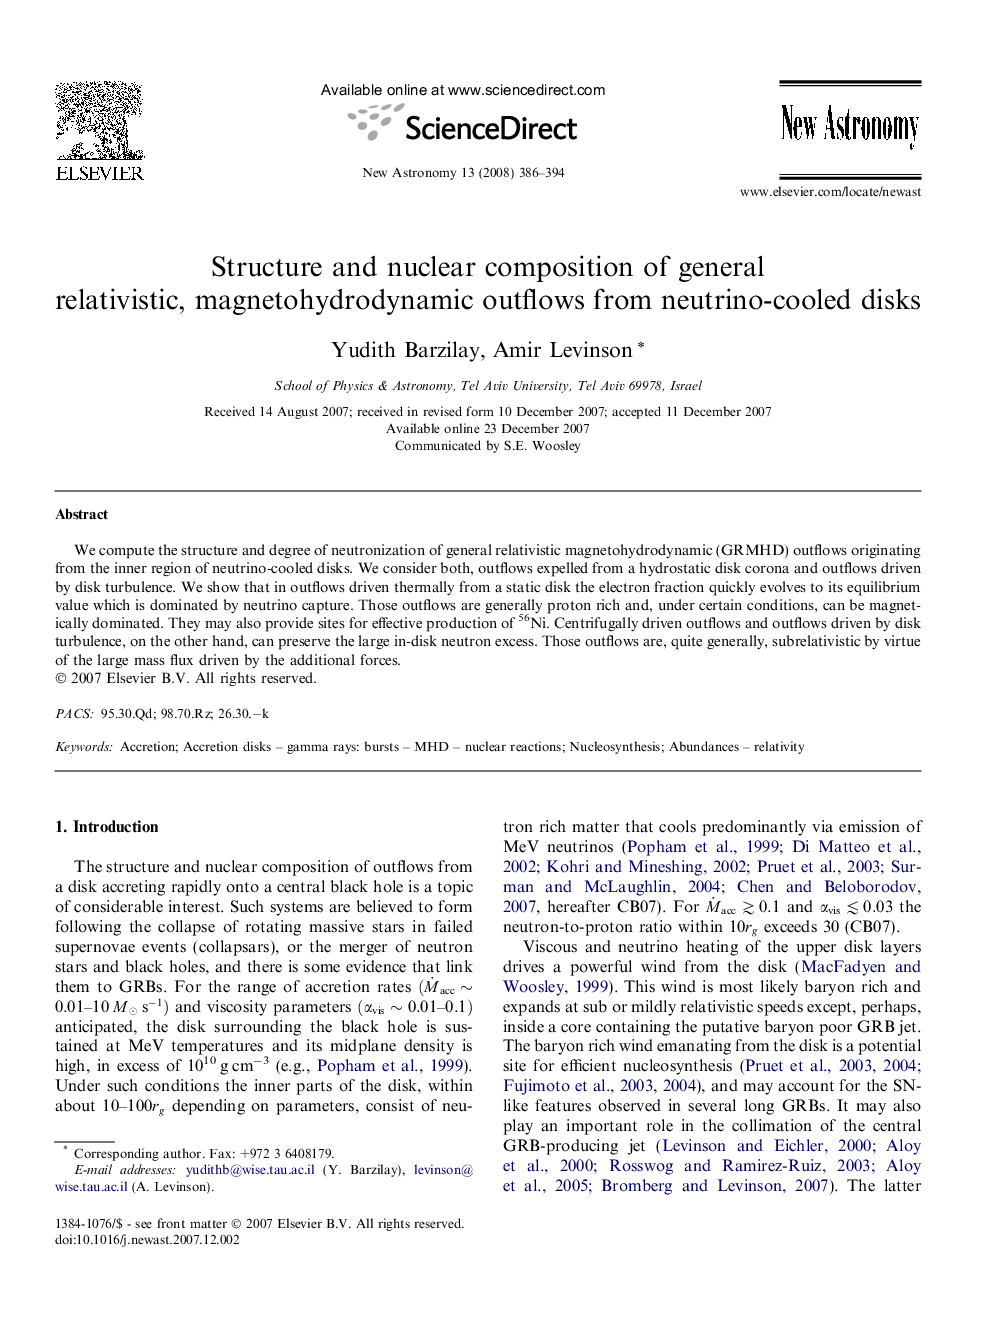 Structure and nuclear composition of general relativistic, magnetohydrodynamic outflows from neutrino-cooled disks